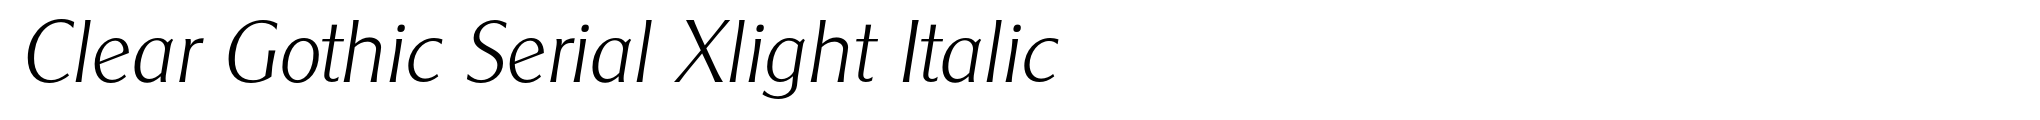 Clear Gothic Serial Xlight Italic image